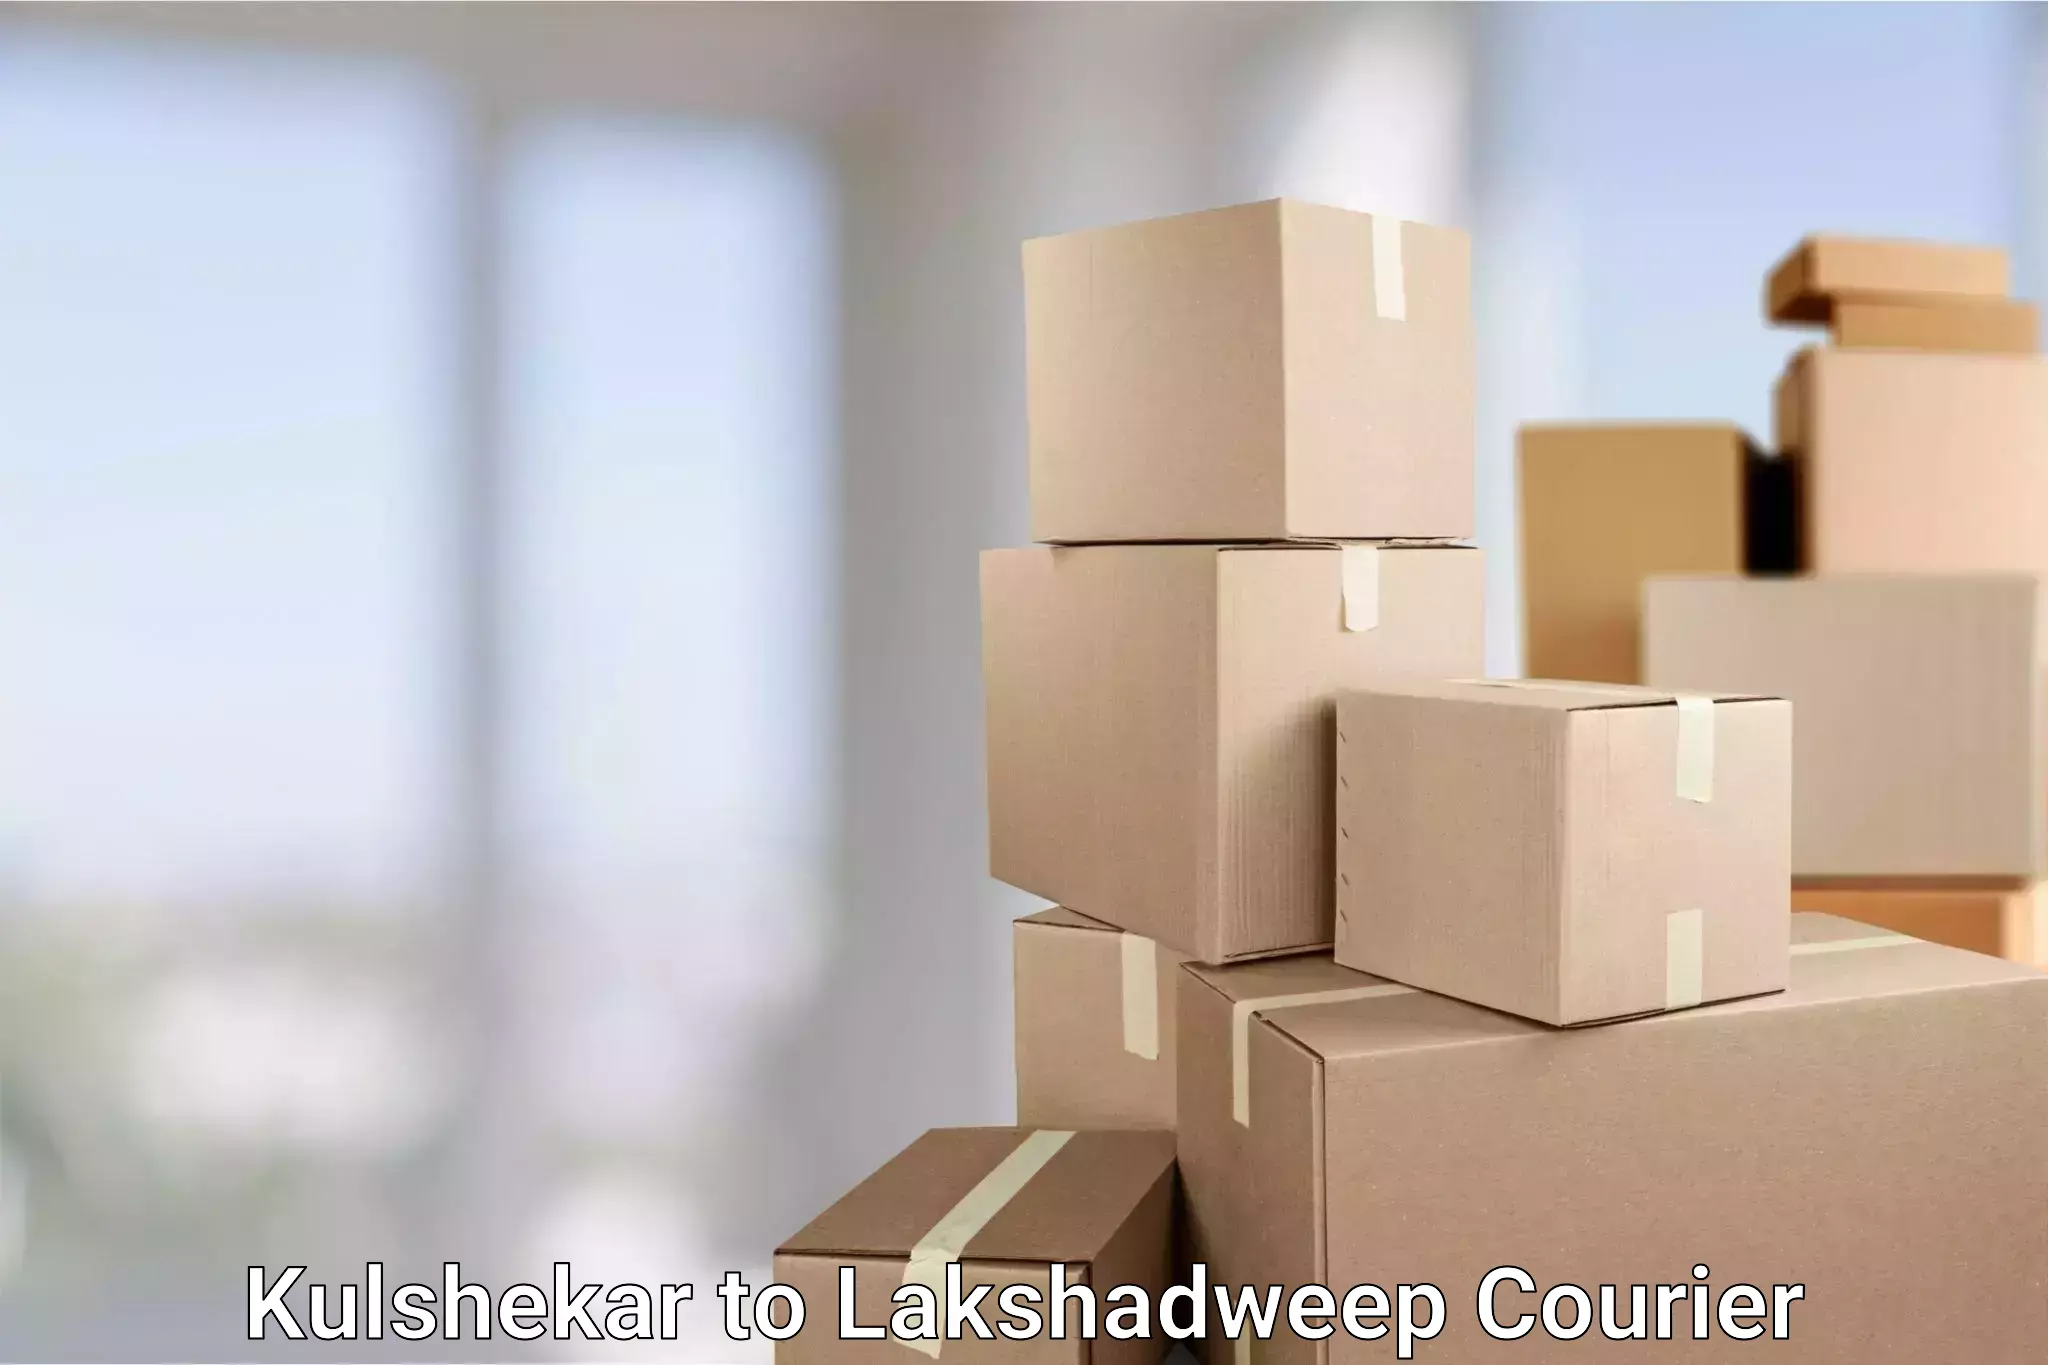 Quality courier services in Kulshekar to Lakshadweep